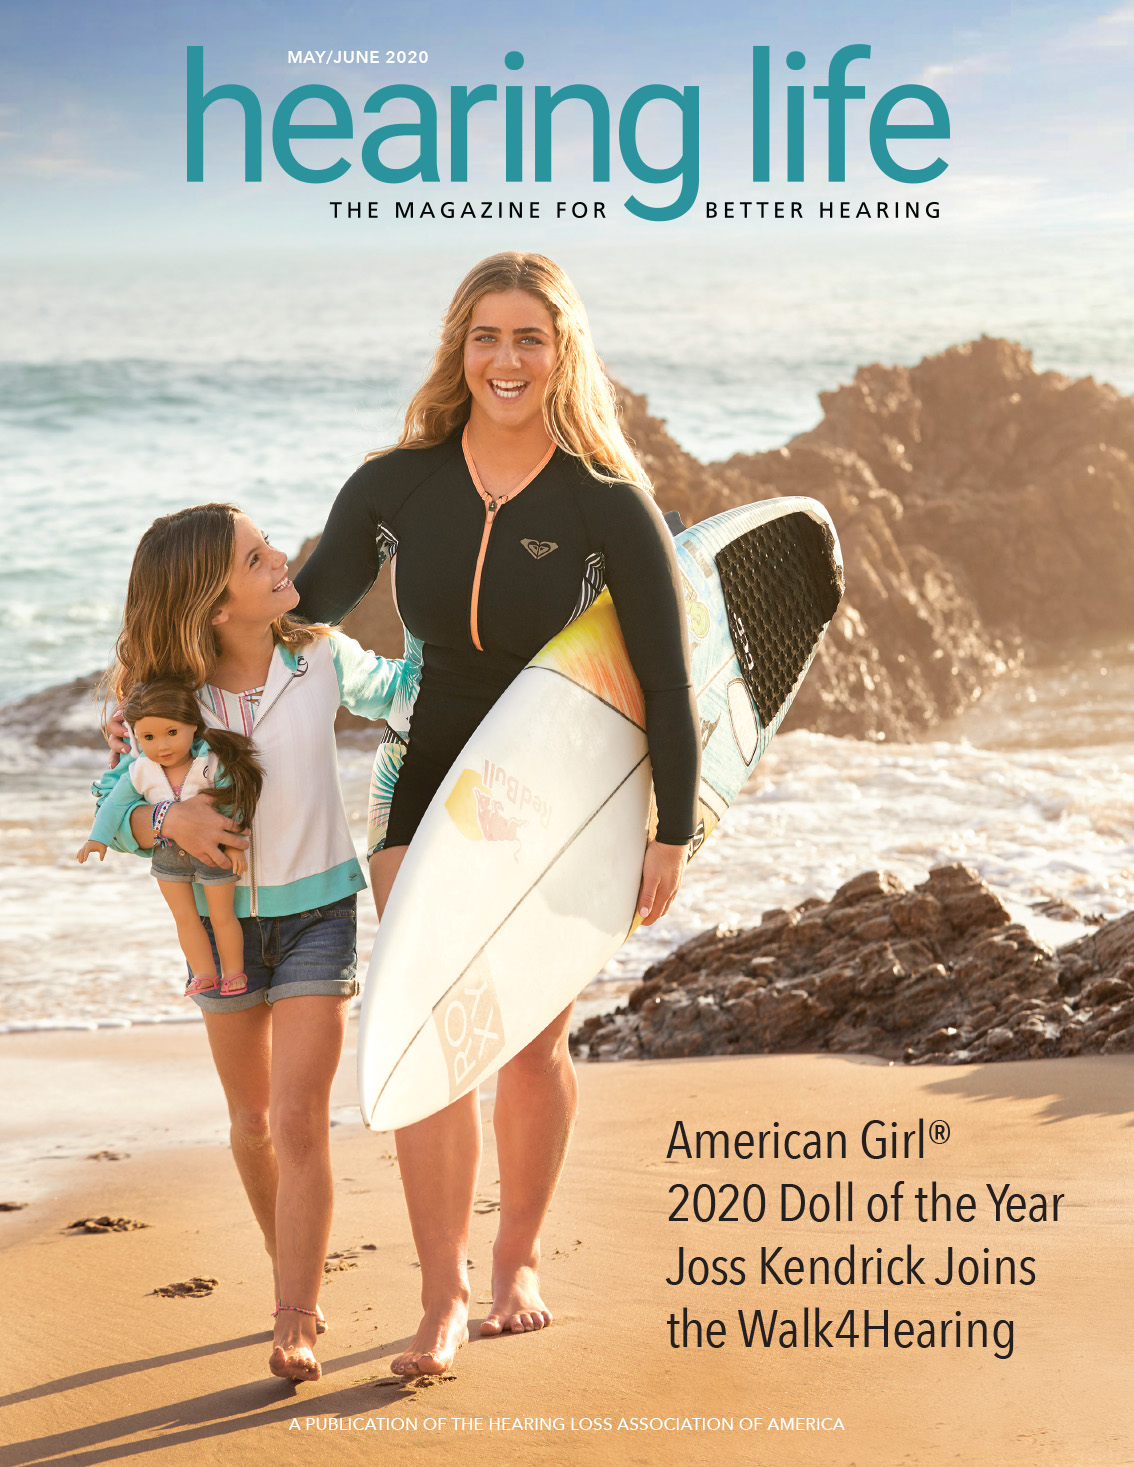 HLAA Hearing Life 2020 May/June Cover with two young ladies at the beach and American Girl 2020 Doll of the Year Joss Kendrick.